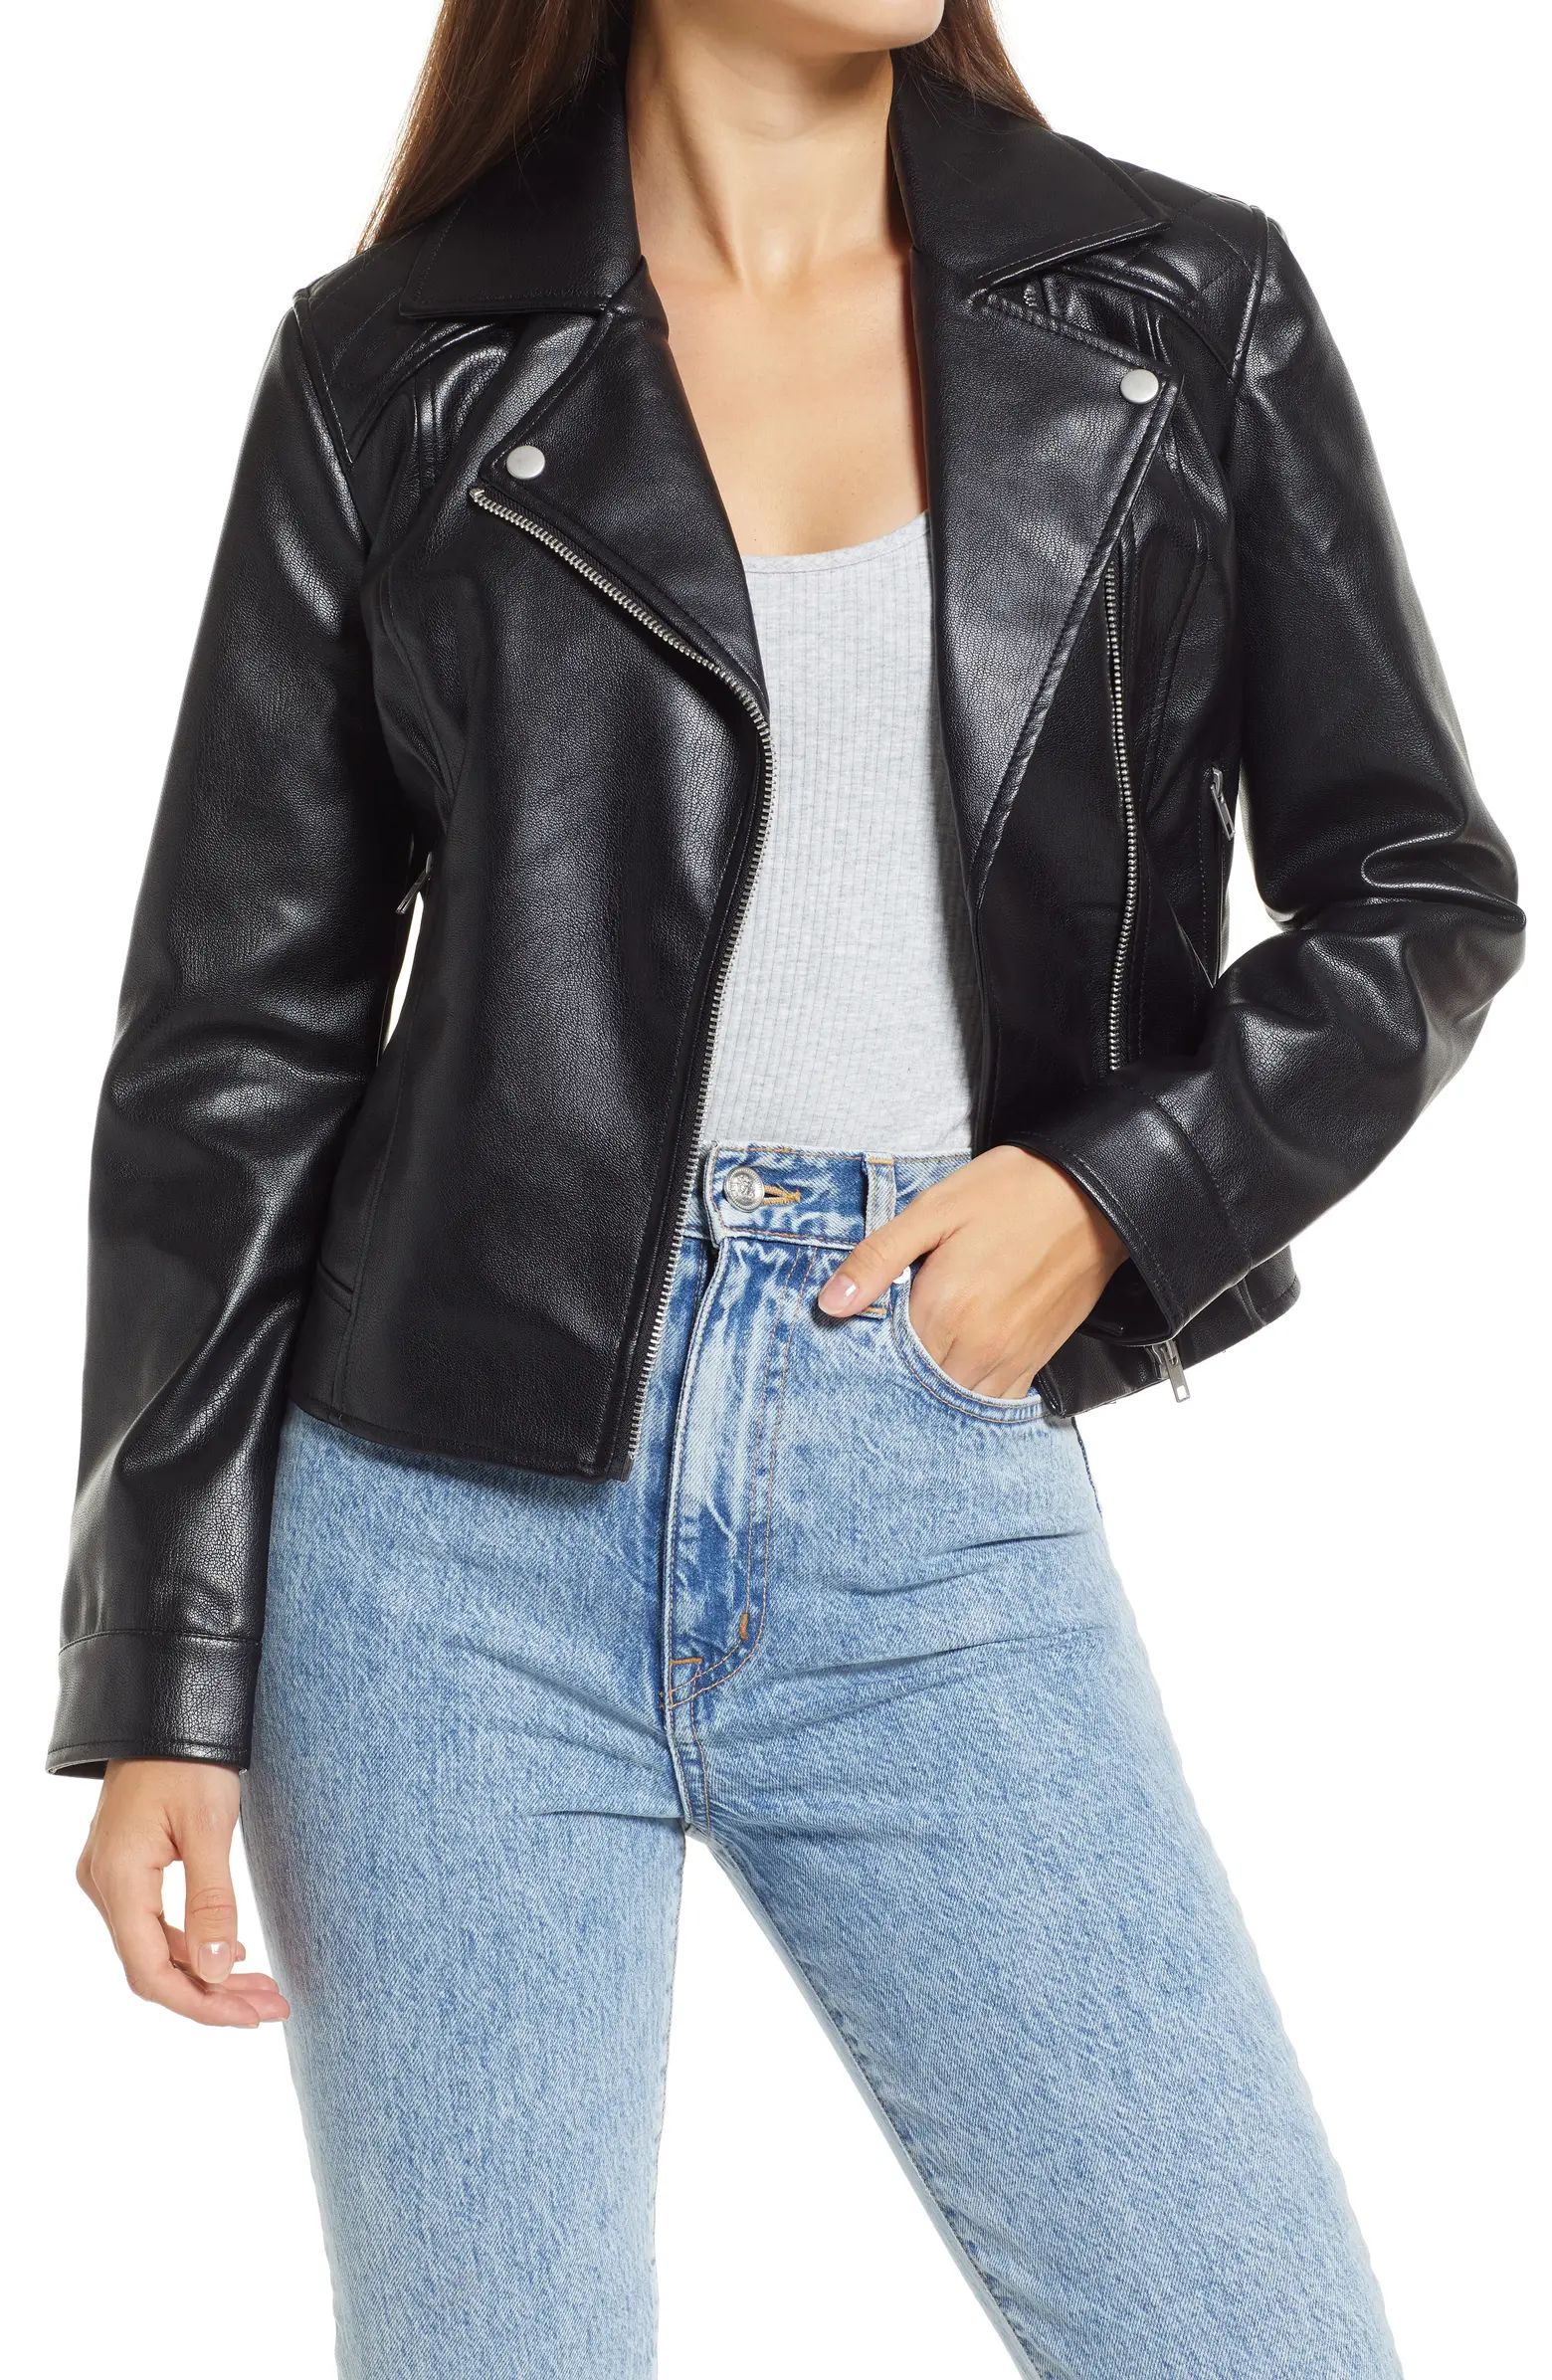 BB Dakota by Steve Madden Going Places Faux Leather Moto Jacket | Nordstrom | Nordstrom